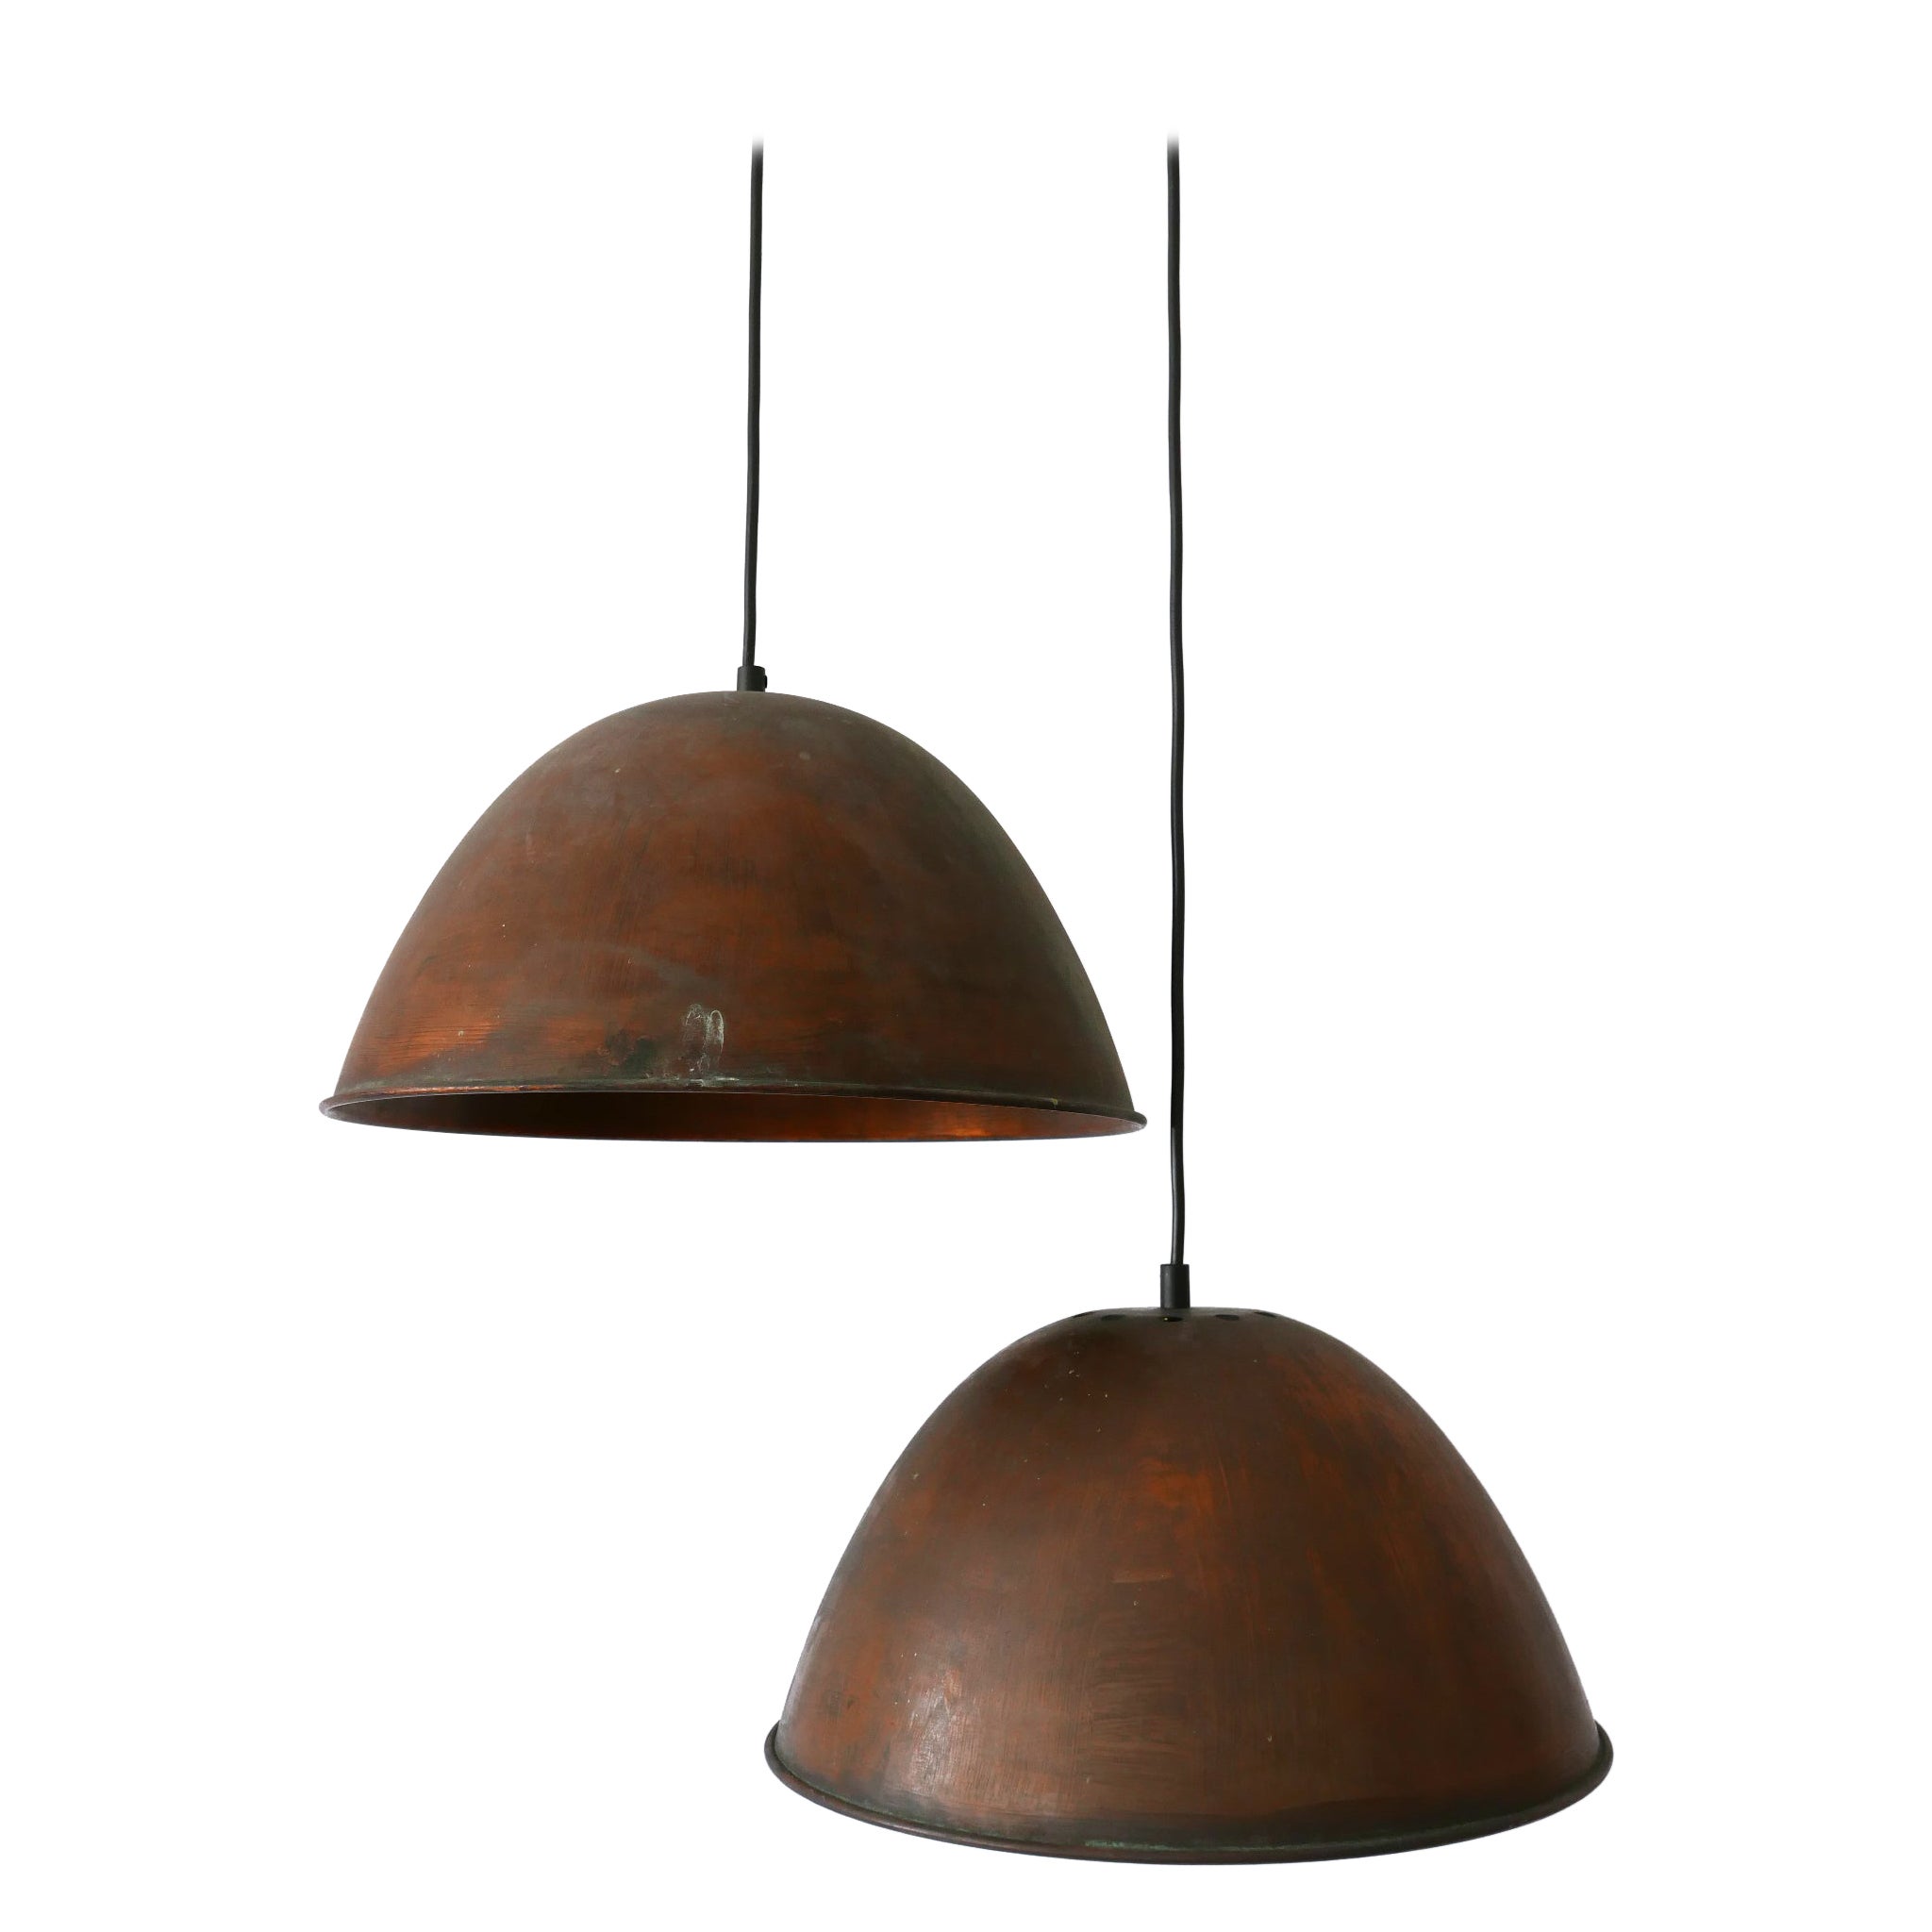 Set of Two Mid-Century Modern Copper Pendant Lamps or Hanging Lights 1950s